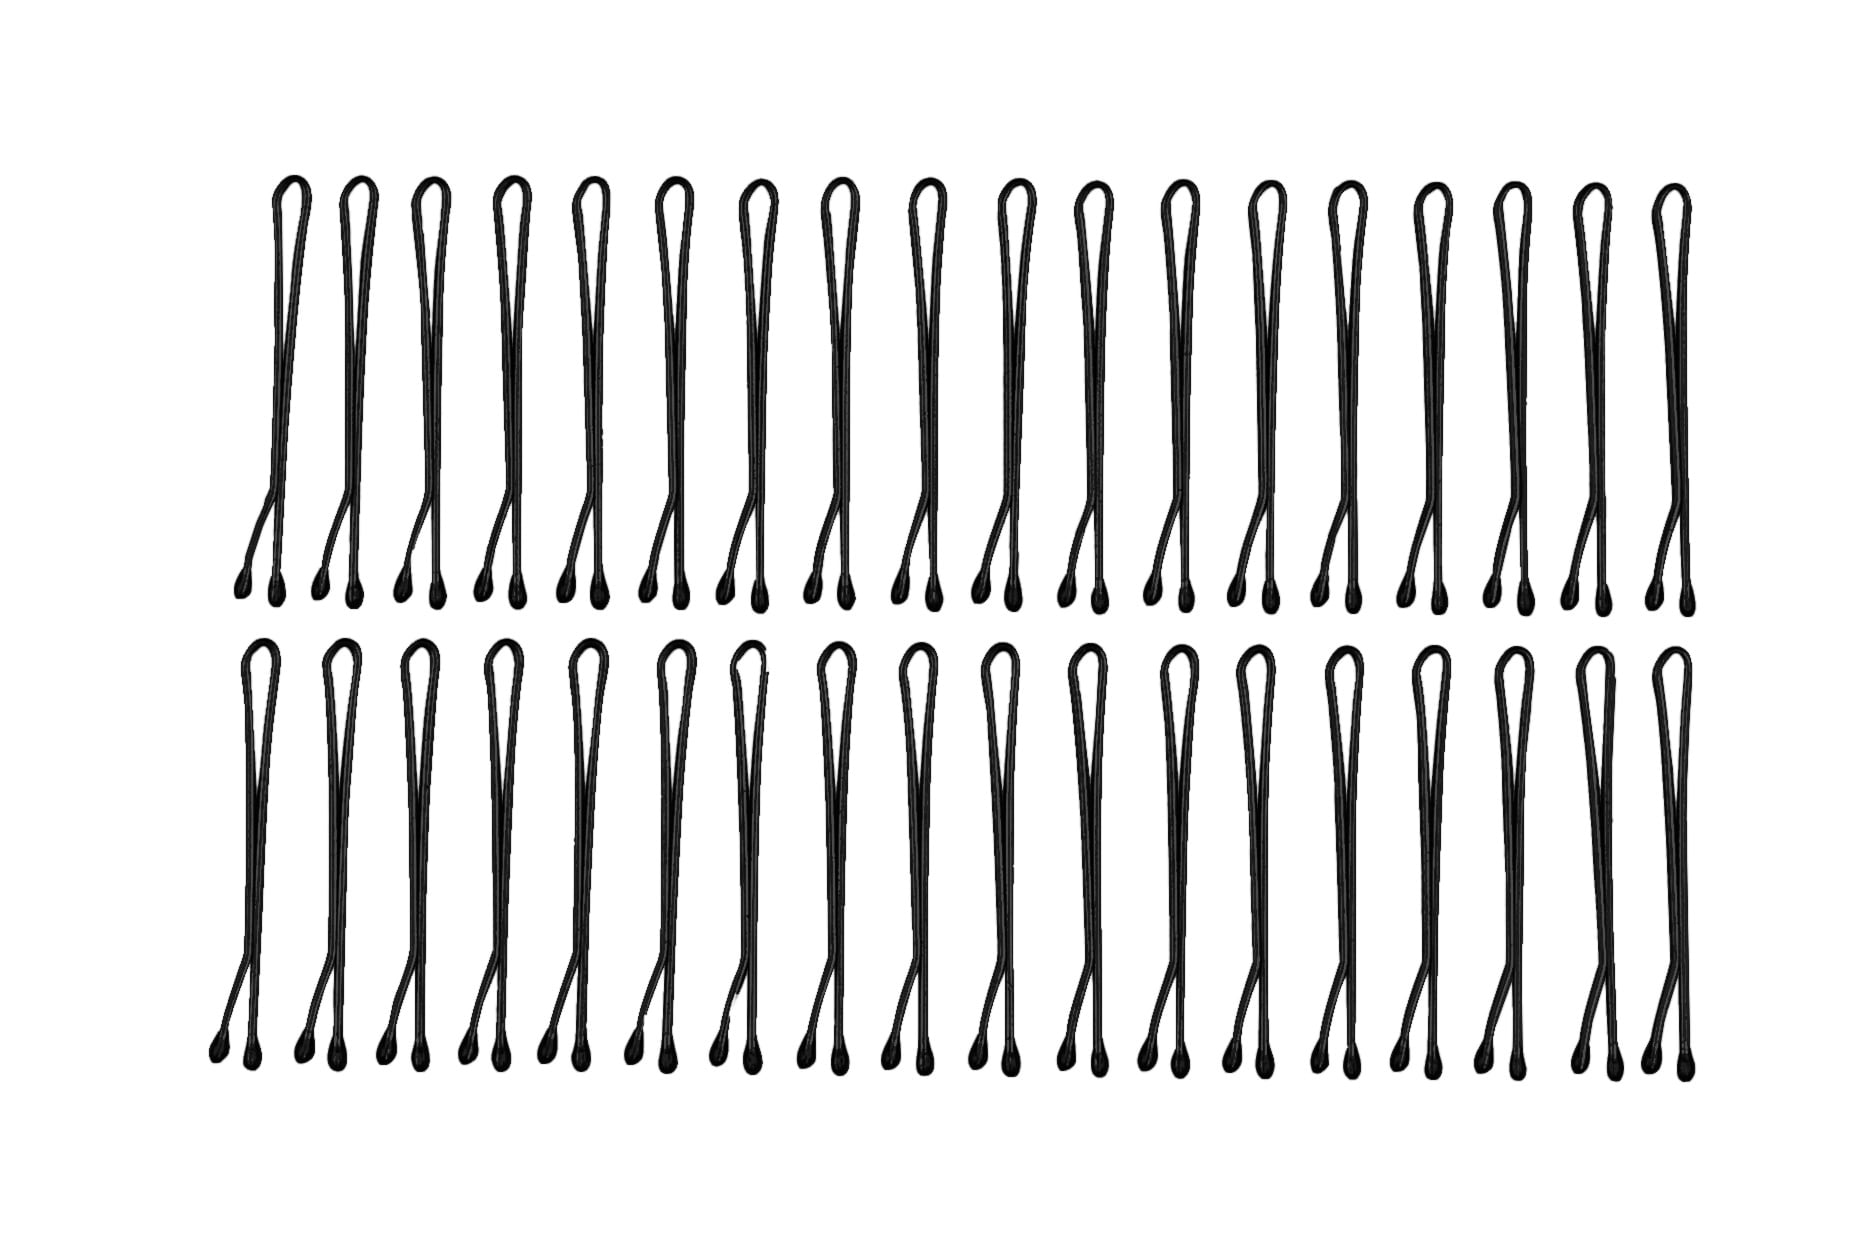 Conair Mini Bobby Pins, Great for Styling, in Black, 36ct - Walmart.com